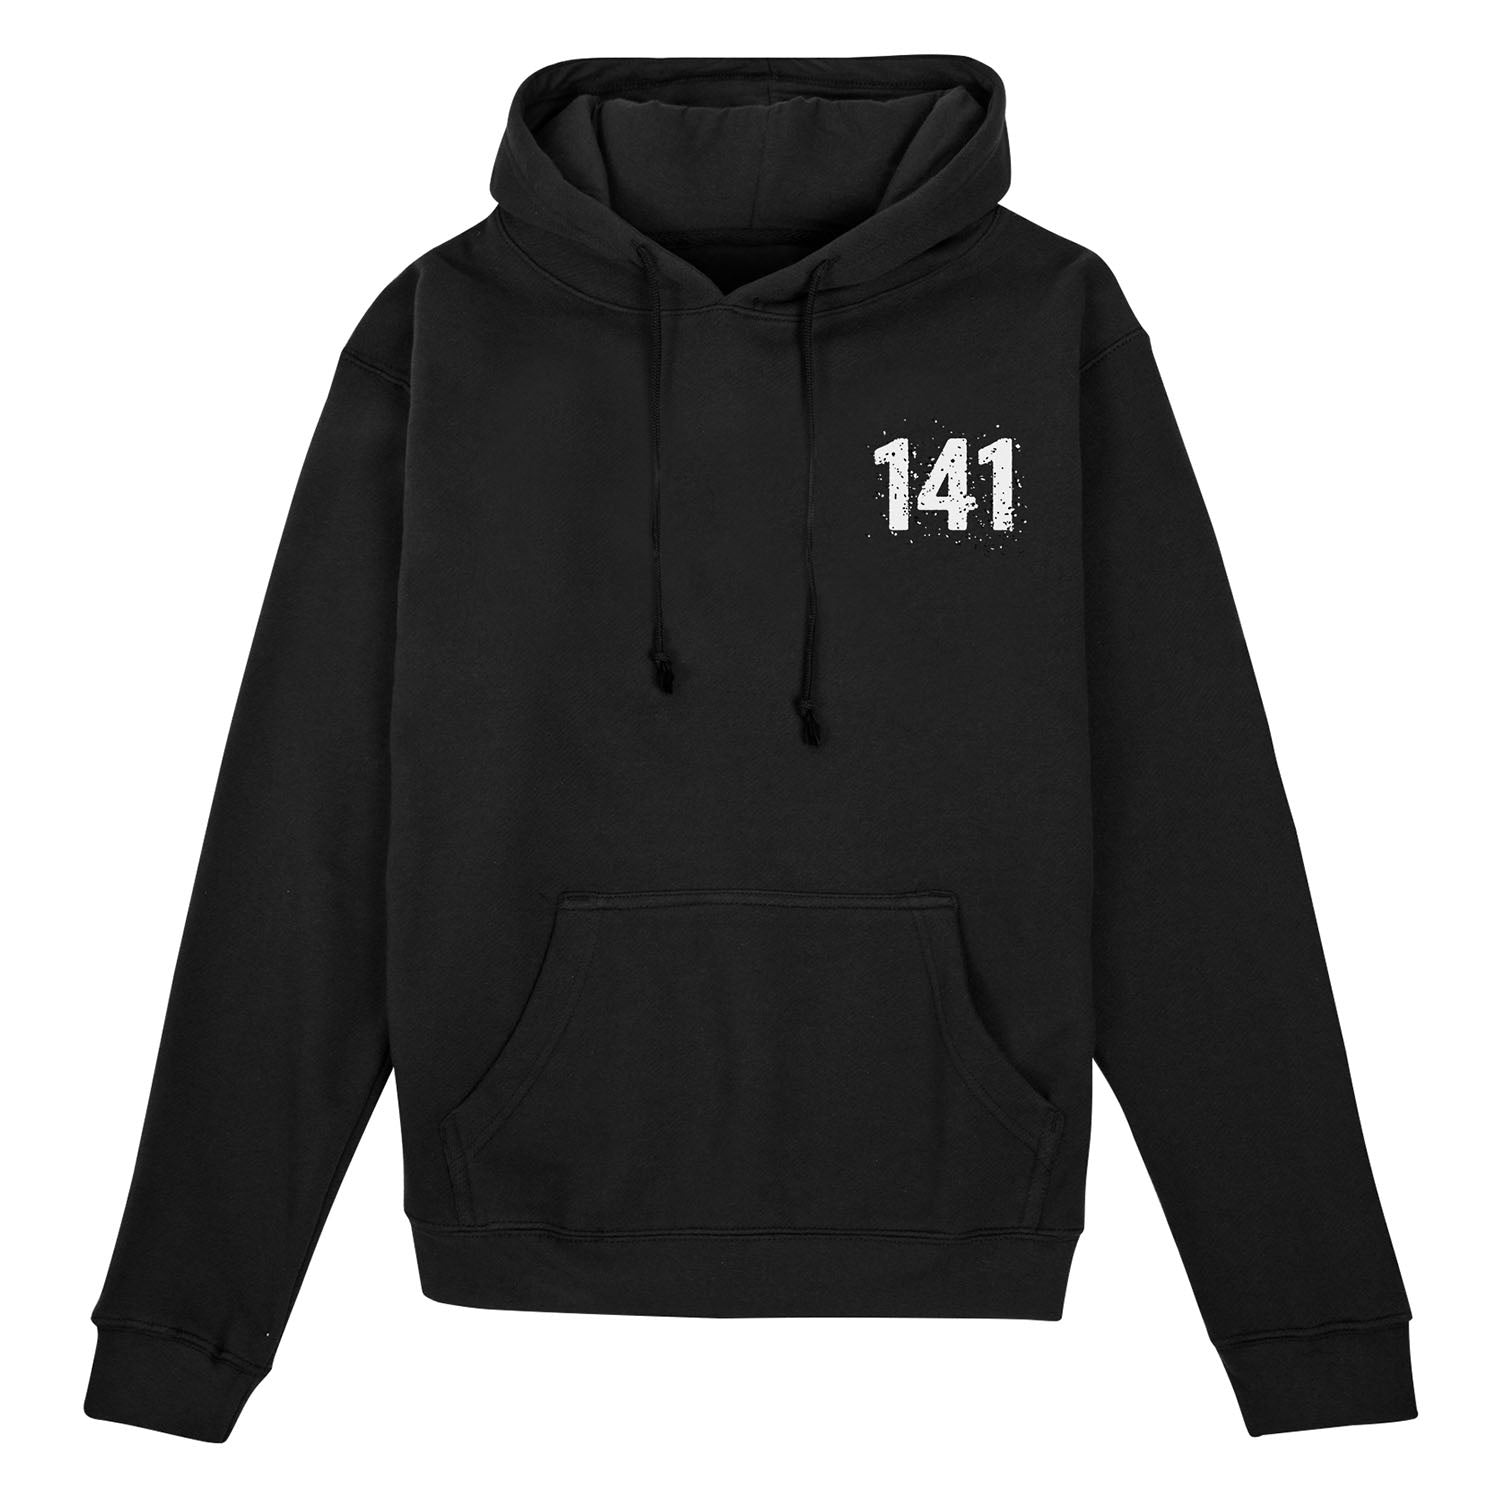 Call of Duty Task Force 141 Distressed Black Hoodie - Front View